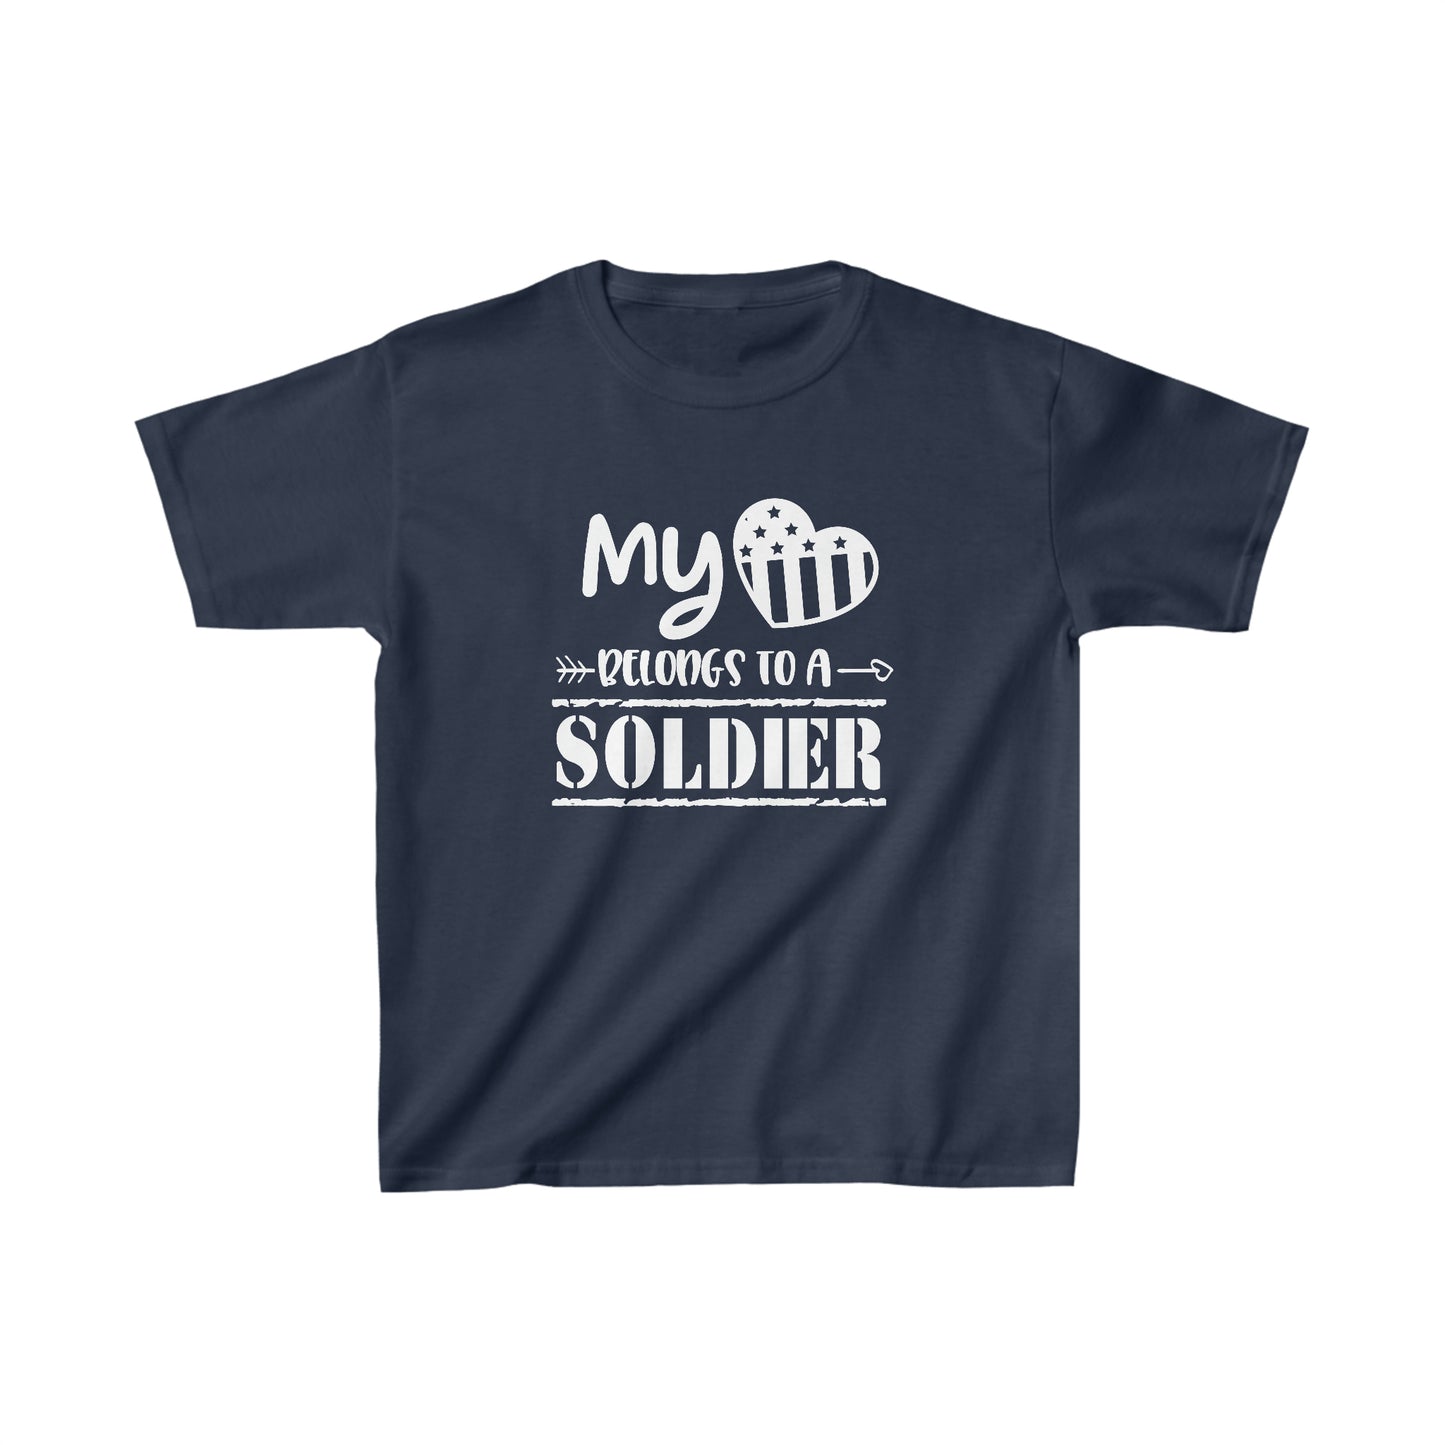 "My Heart belongs to a Soldier" - Unisex Youth Short Sleeve Tee